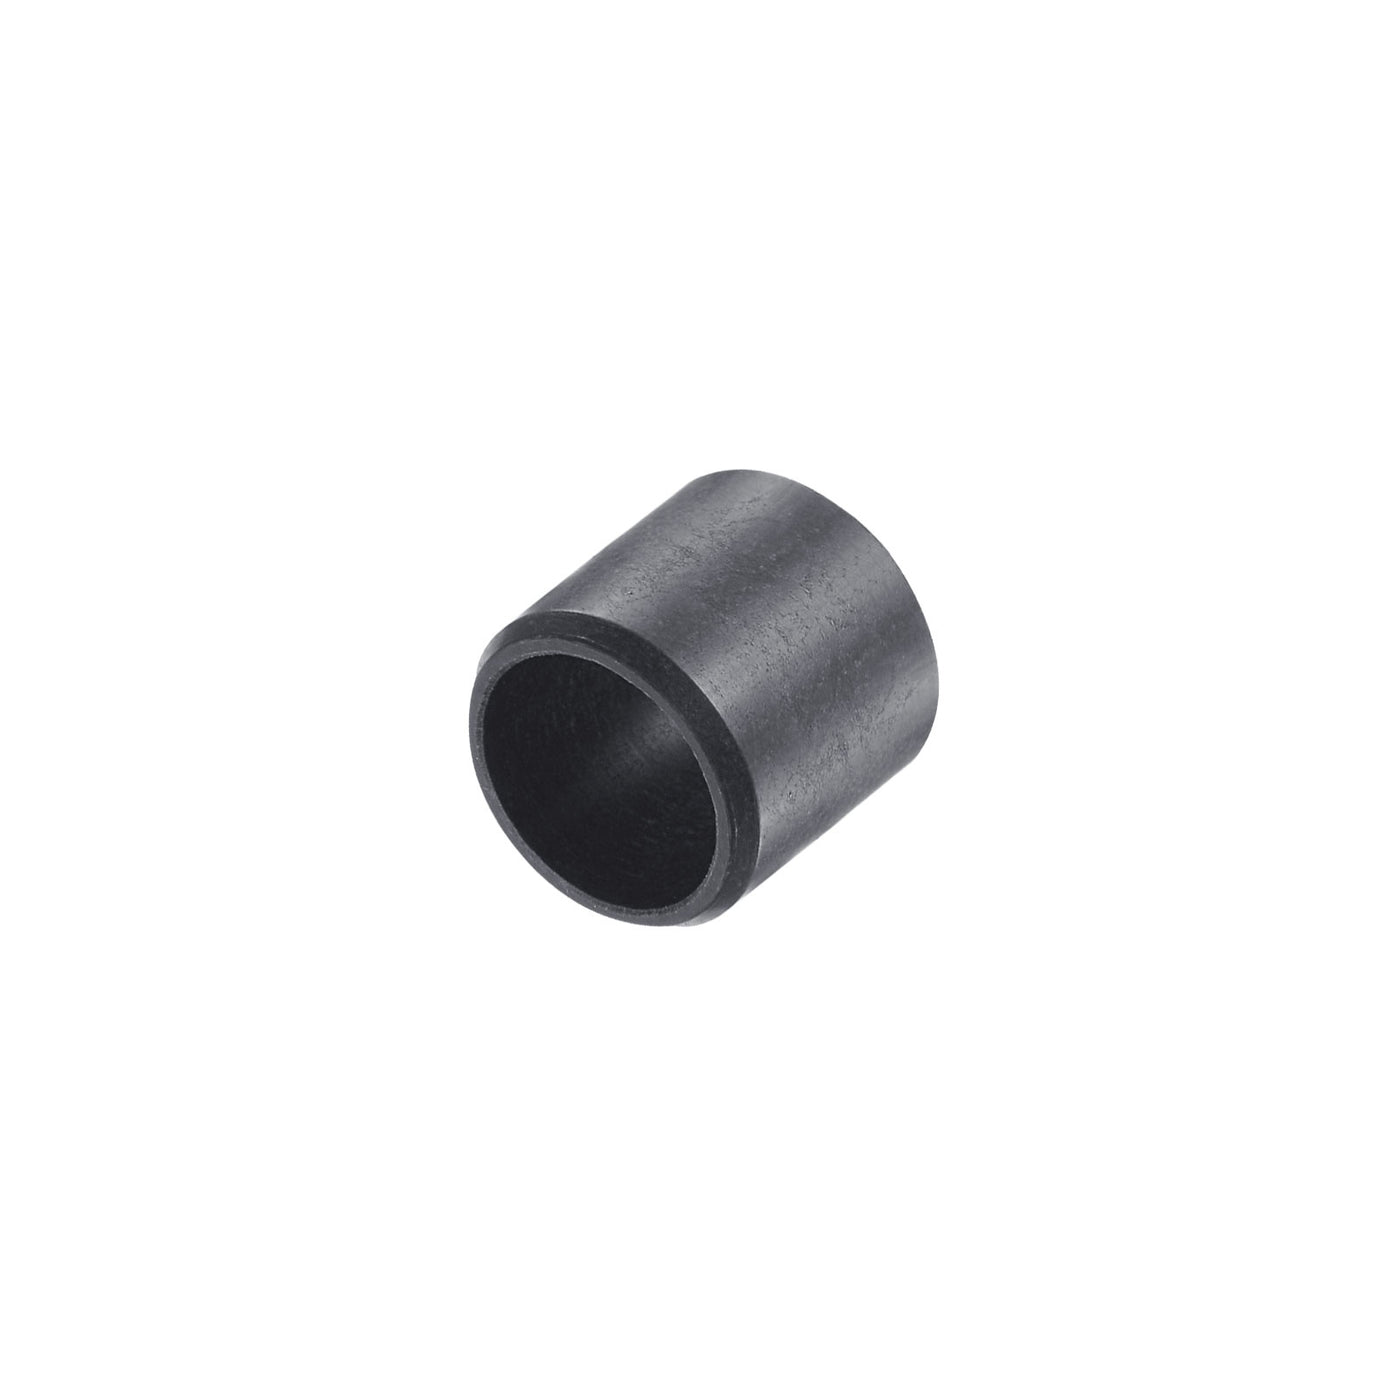 uxcell Uxcell Sleeve Bearings 8mmx10mmx8mm POM Wrapped Oilless Bushings Black